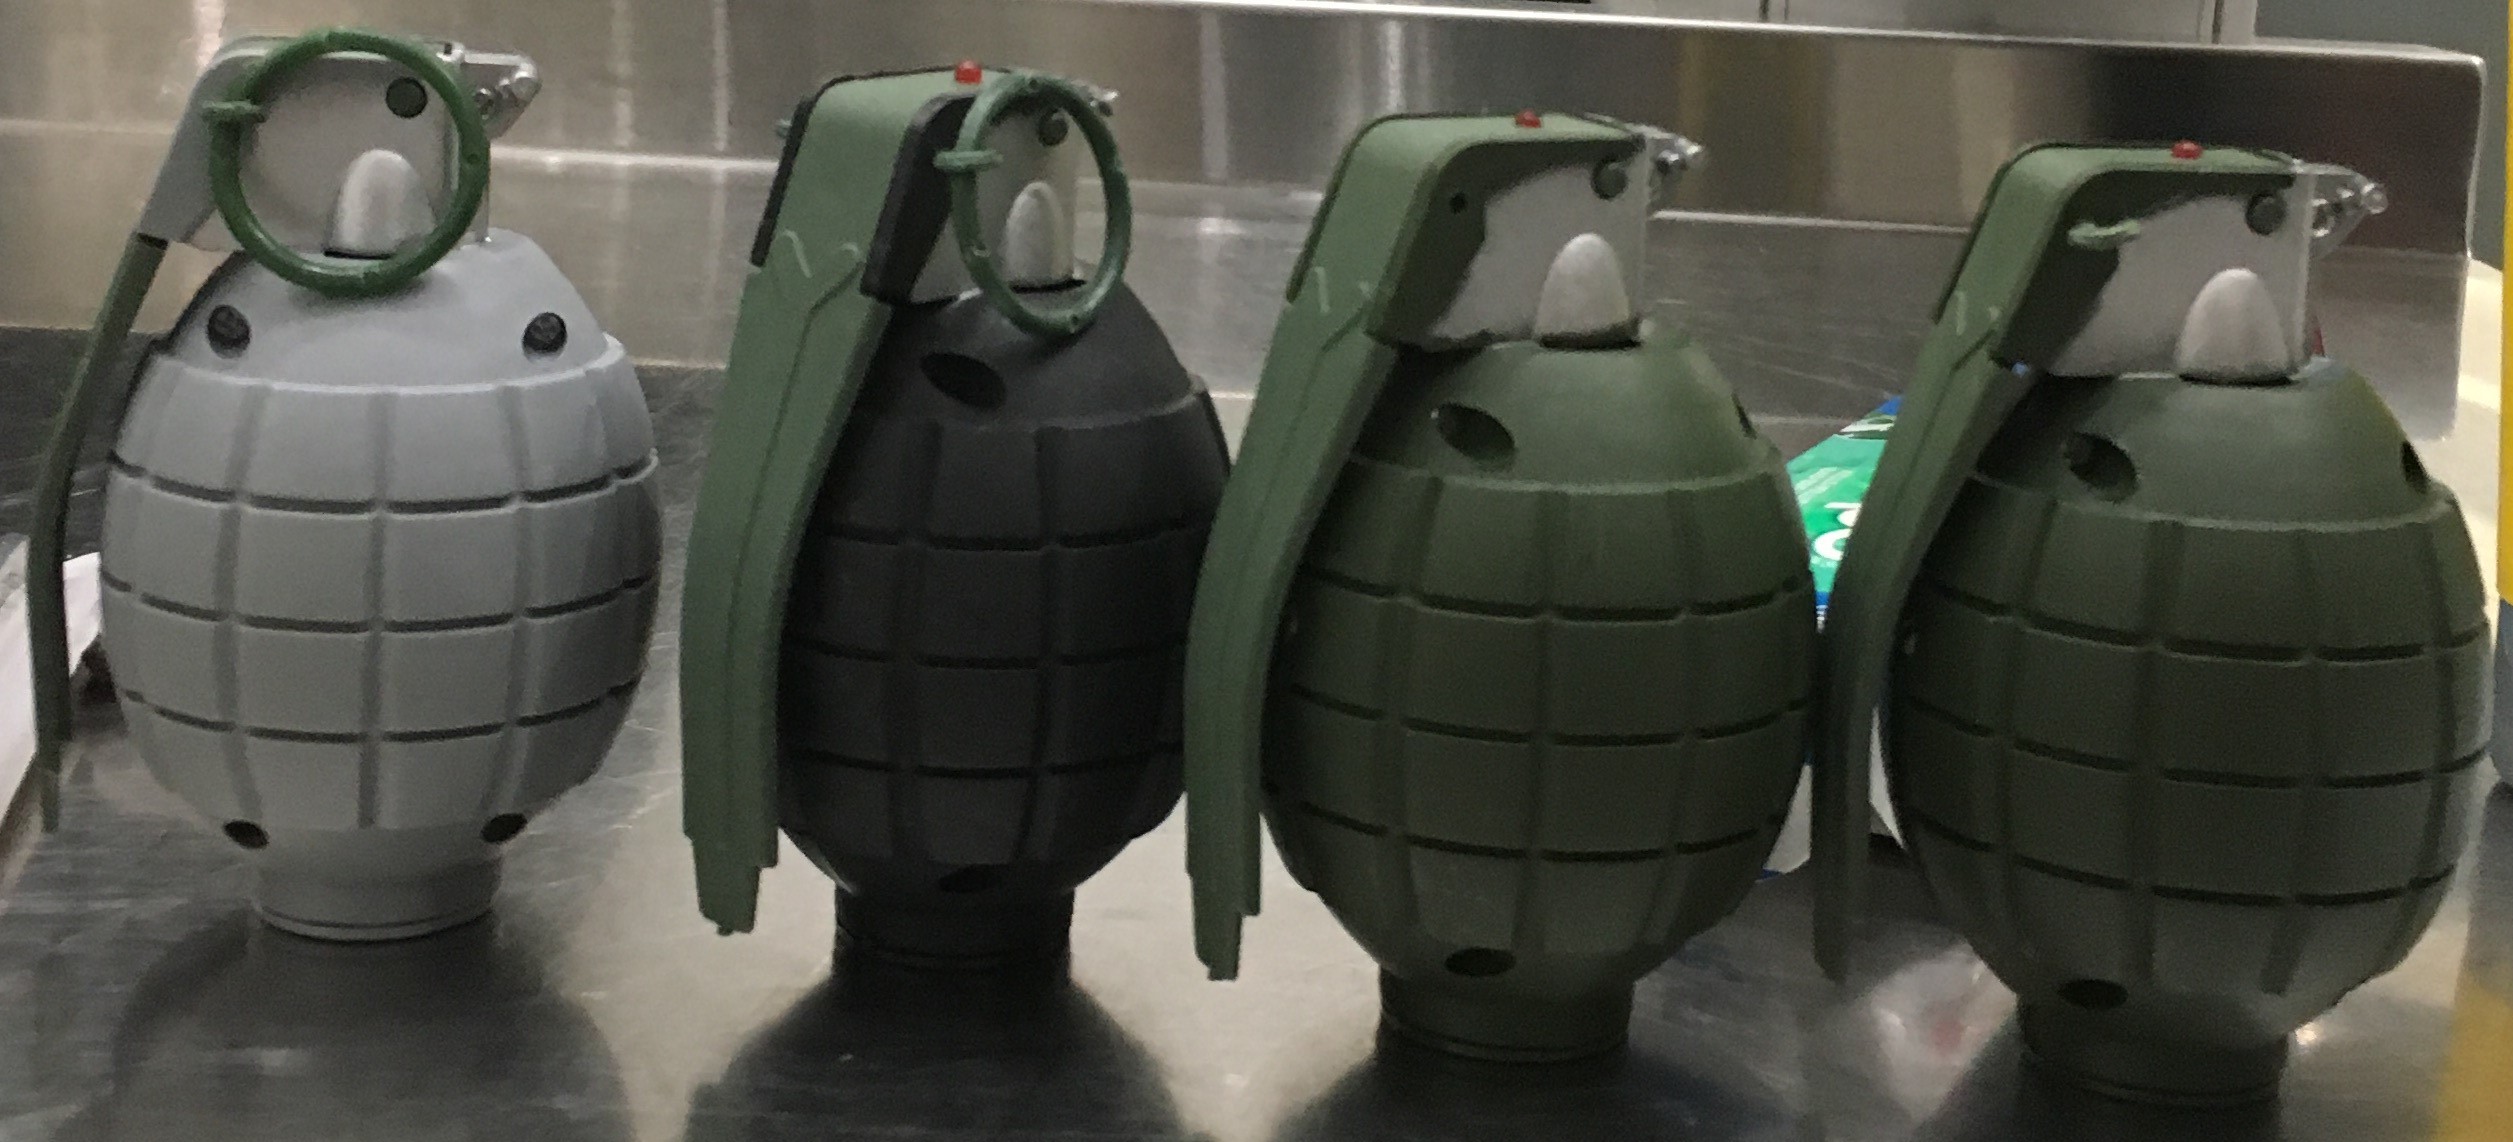 These 4 replica grenades were discovered in a carry-on bag at the Baltimore-Washington International Airport (BWI).